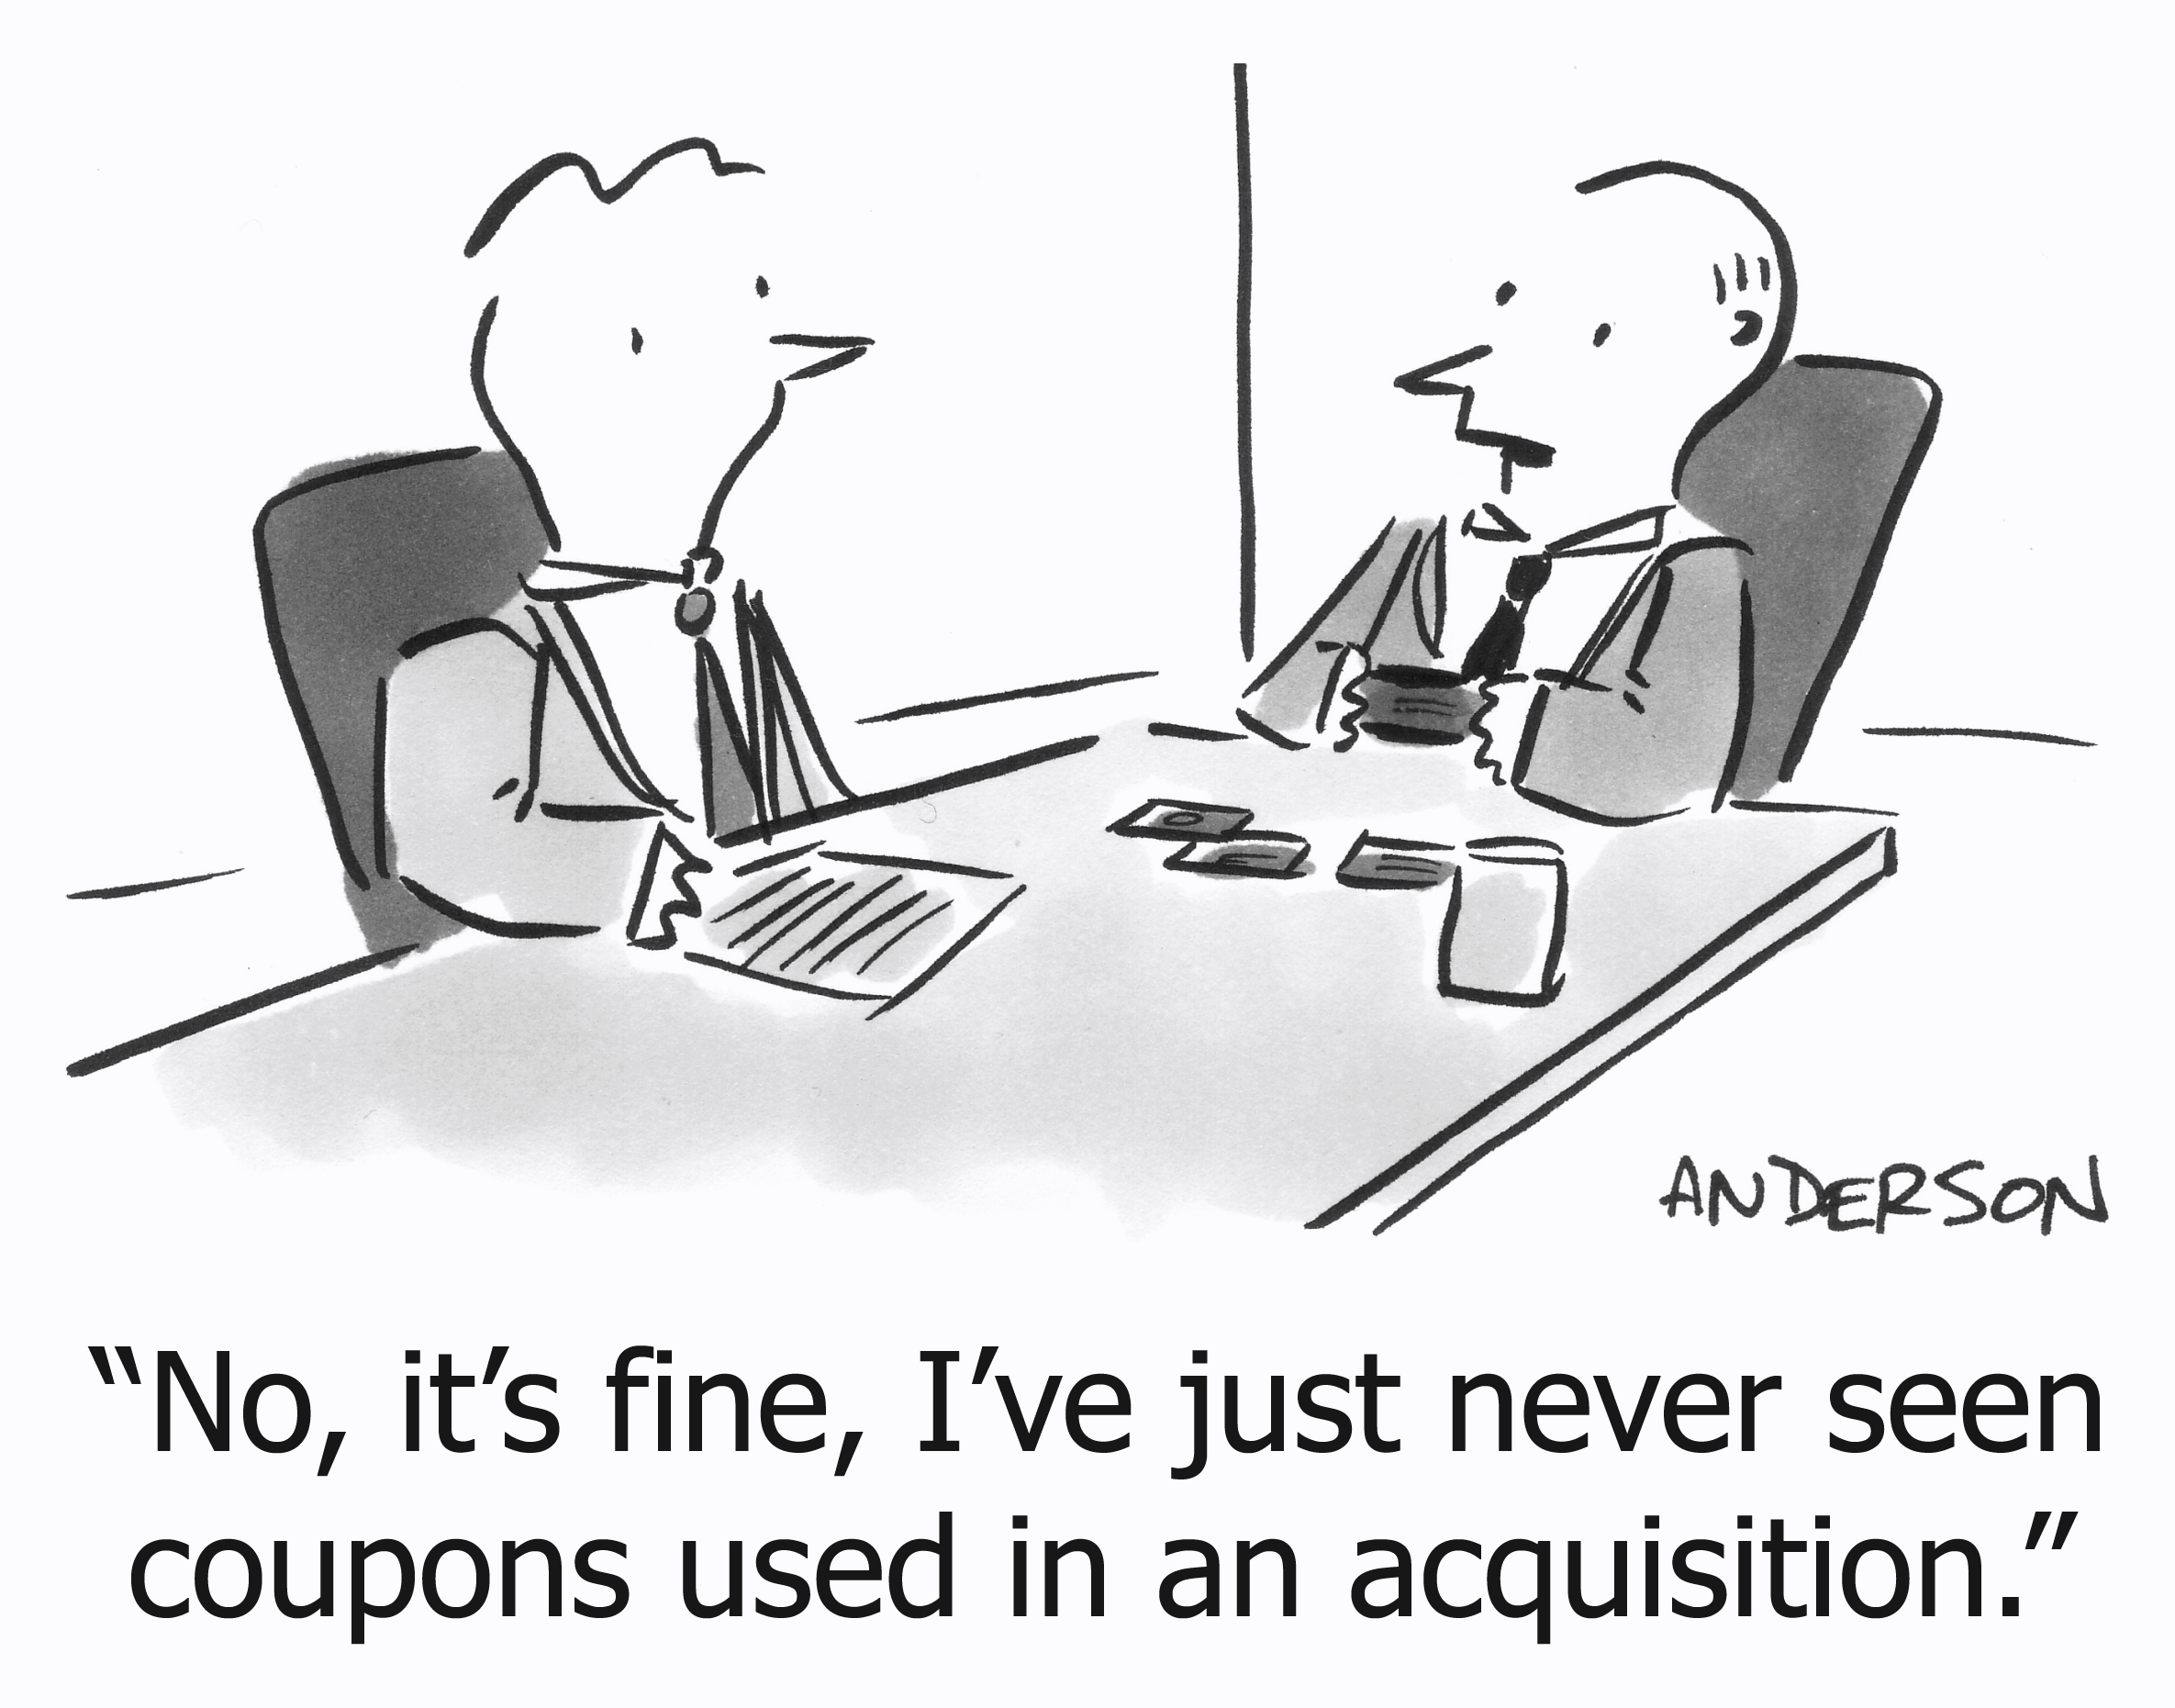 No, it's fine, I've just never seen coupons used in an acquisition.